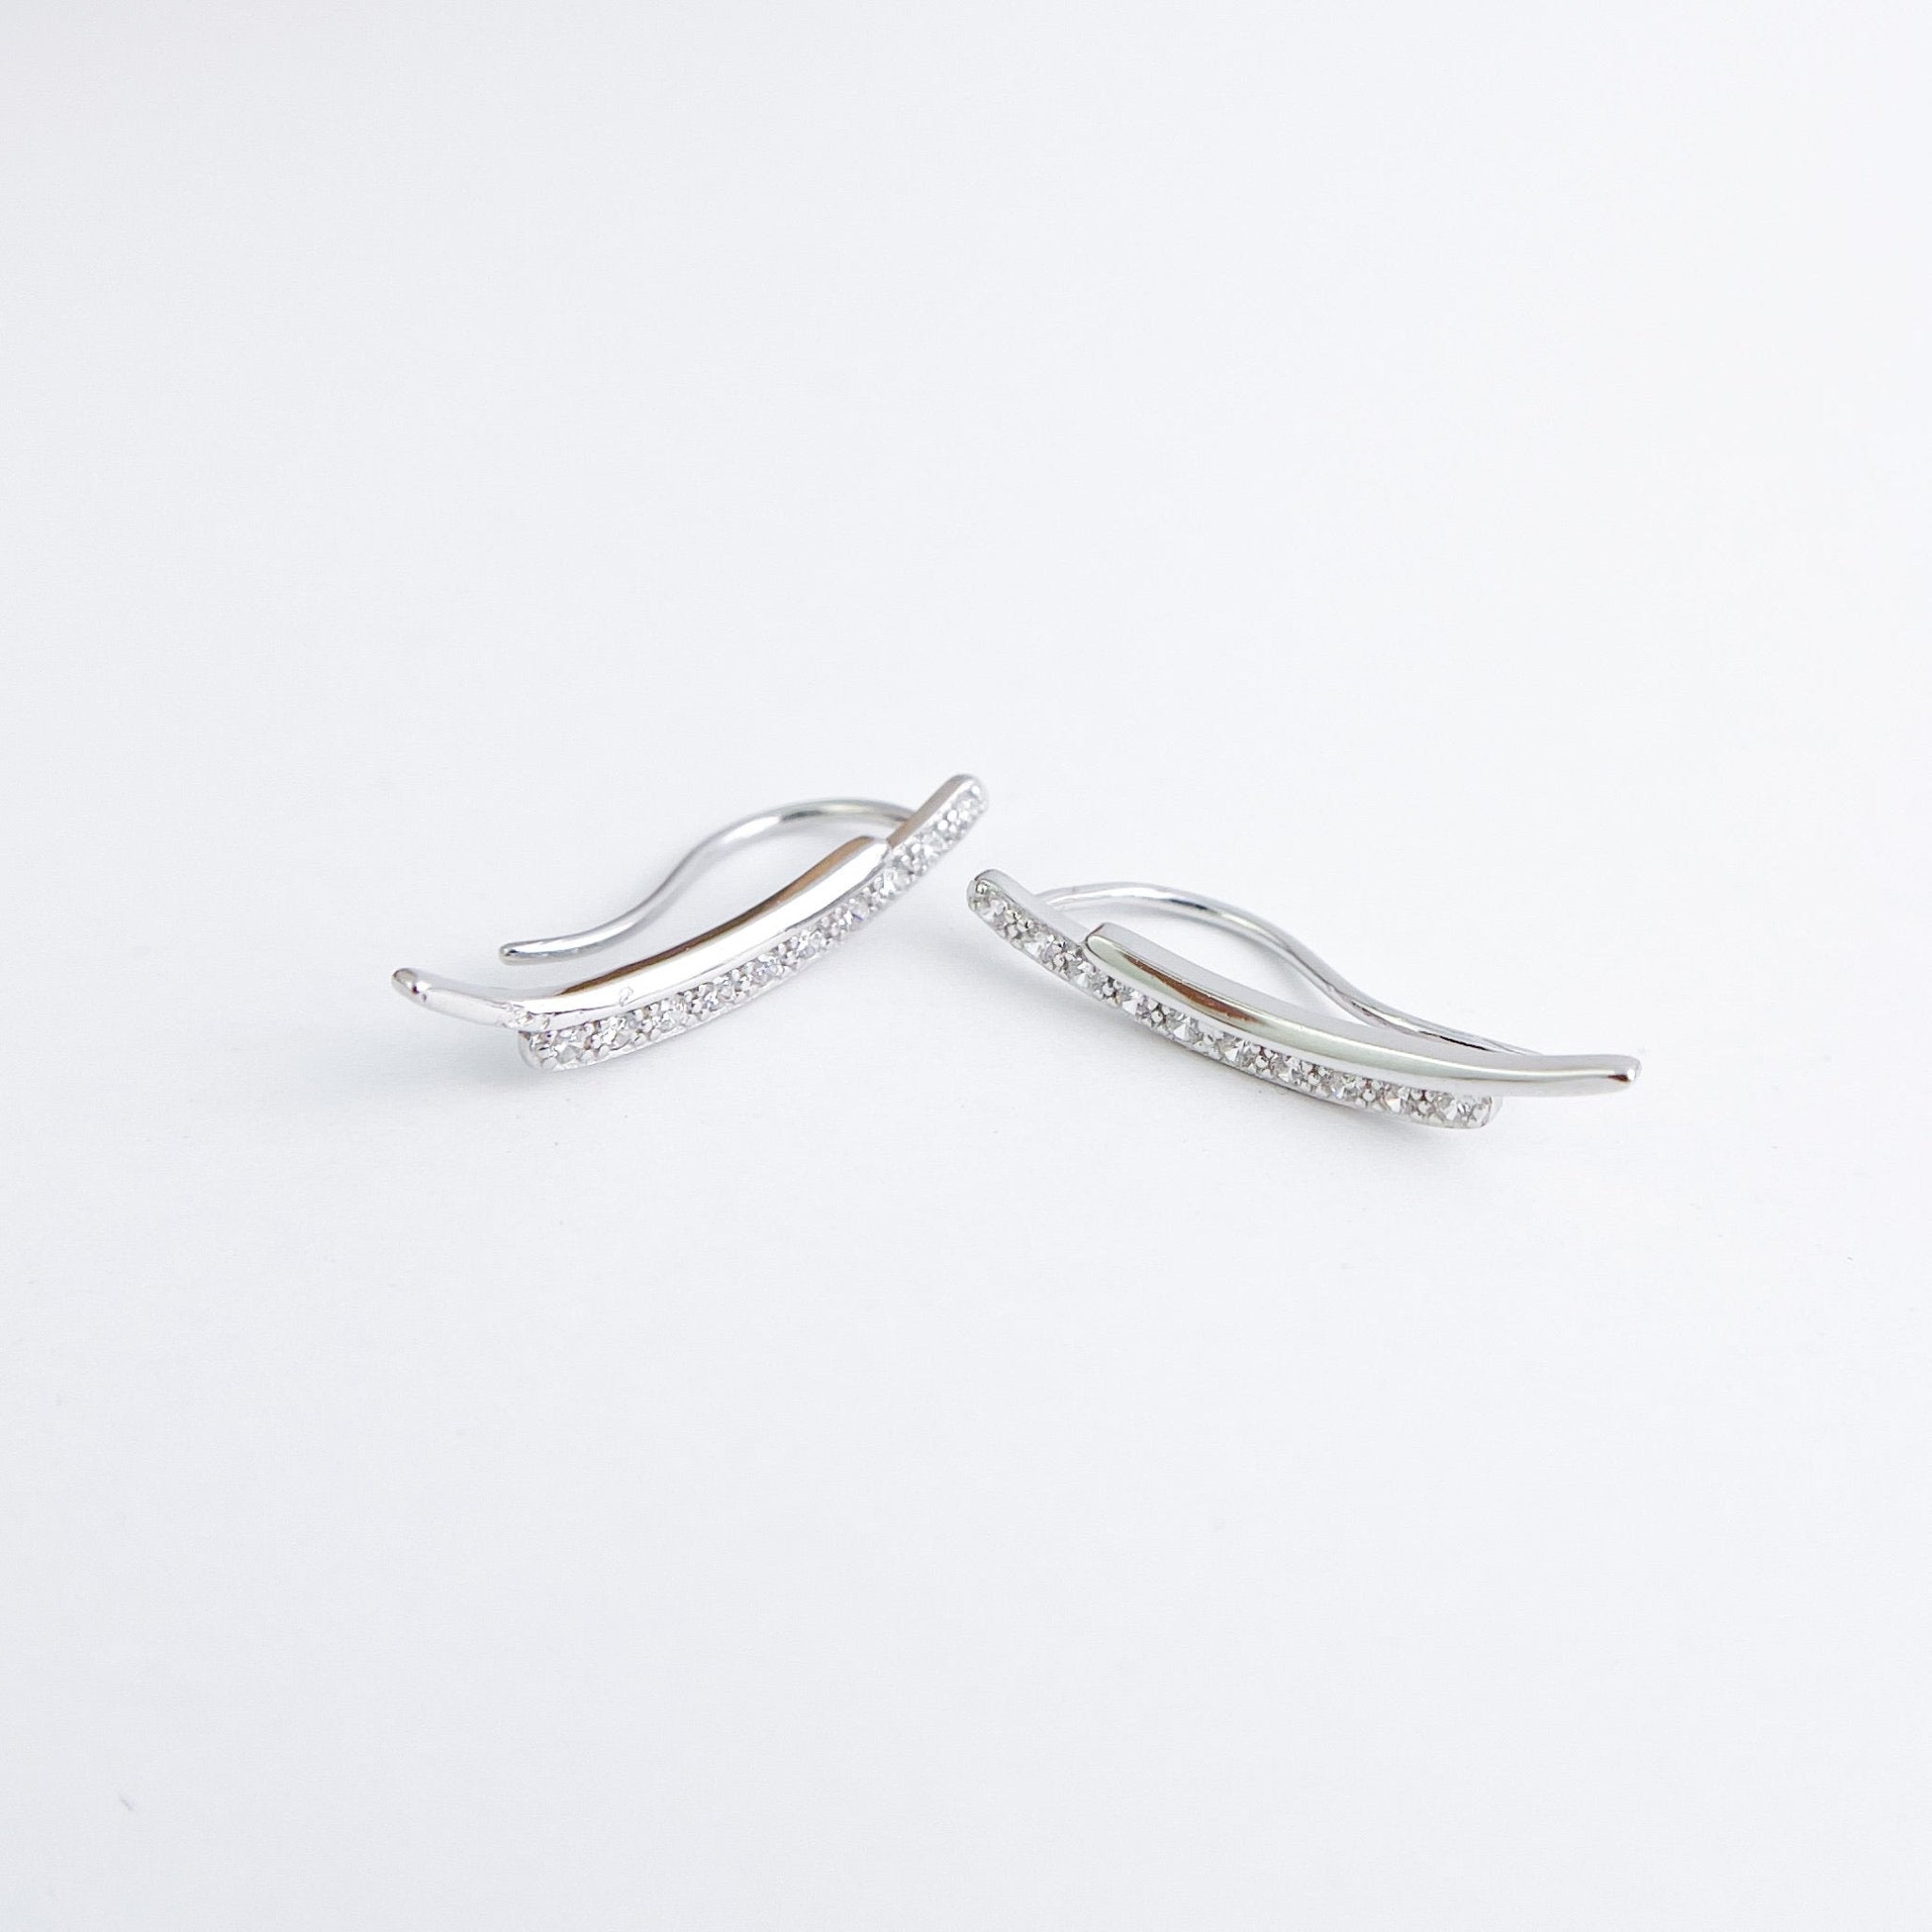 Renee Sterling Ear Climbers in Silver - Flaire & Co.